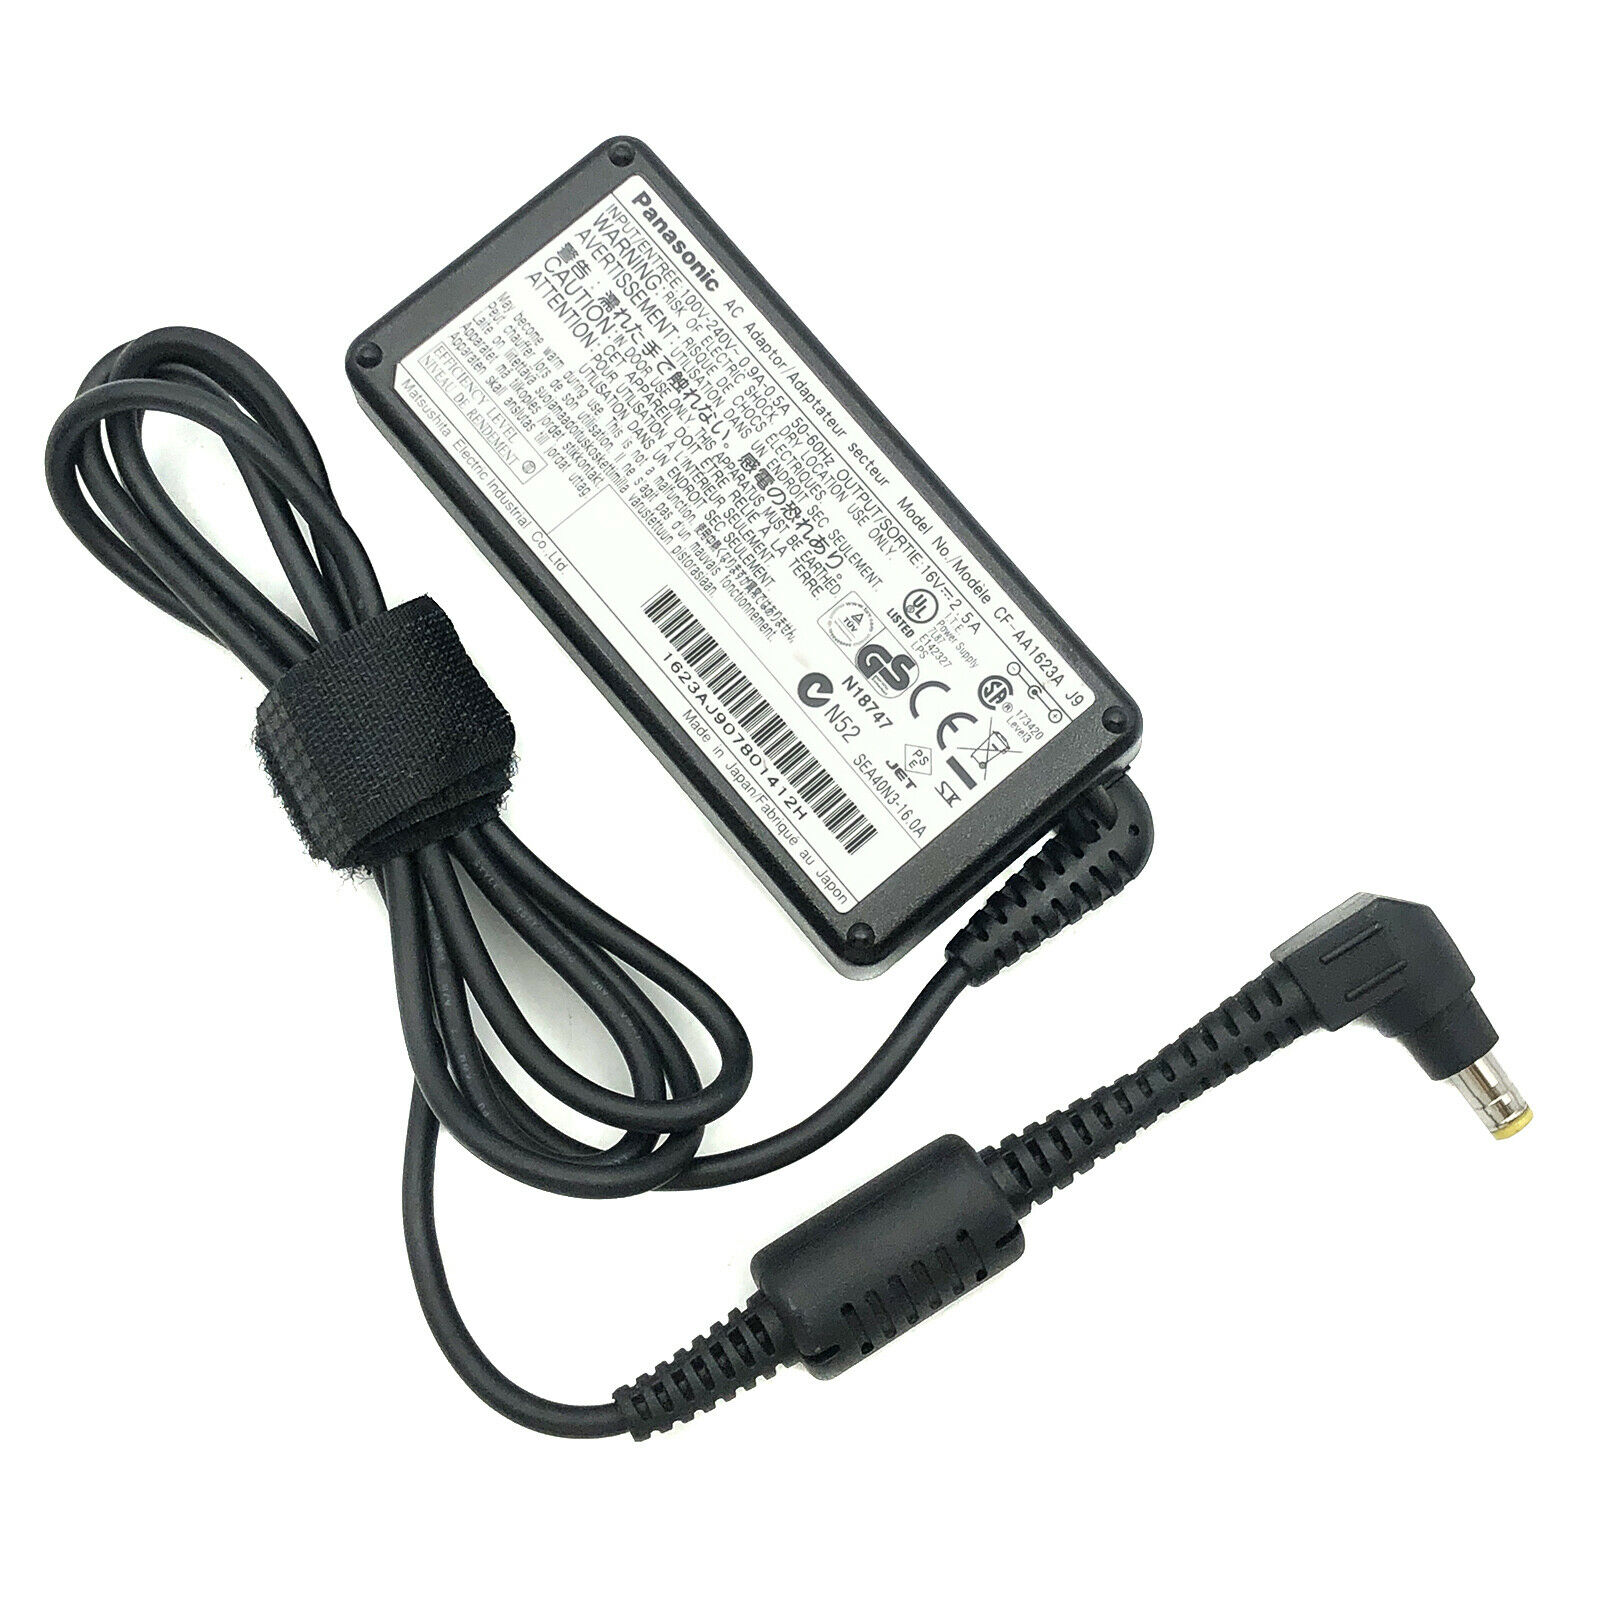 Genuine Panasonic AC Adapter Charger for Toughbook CF-27 CF-28 CF-33 CF-34 n/PC Compatible Brand: